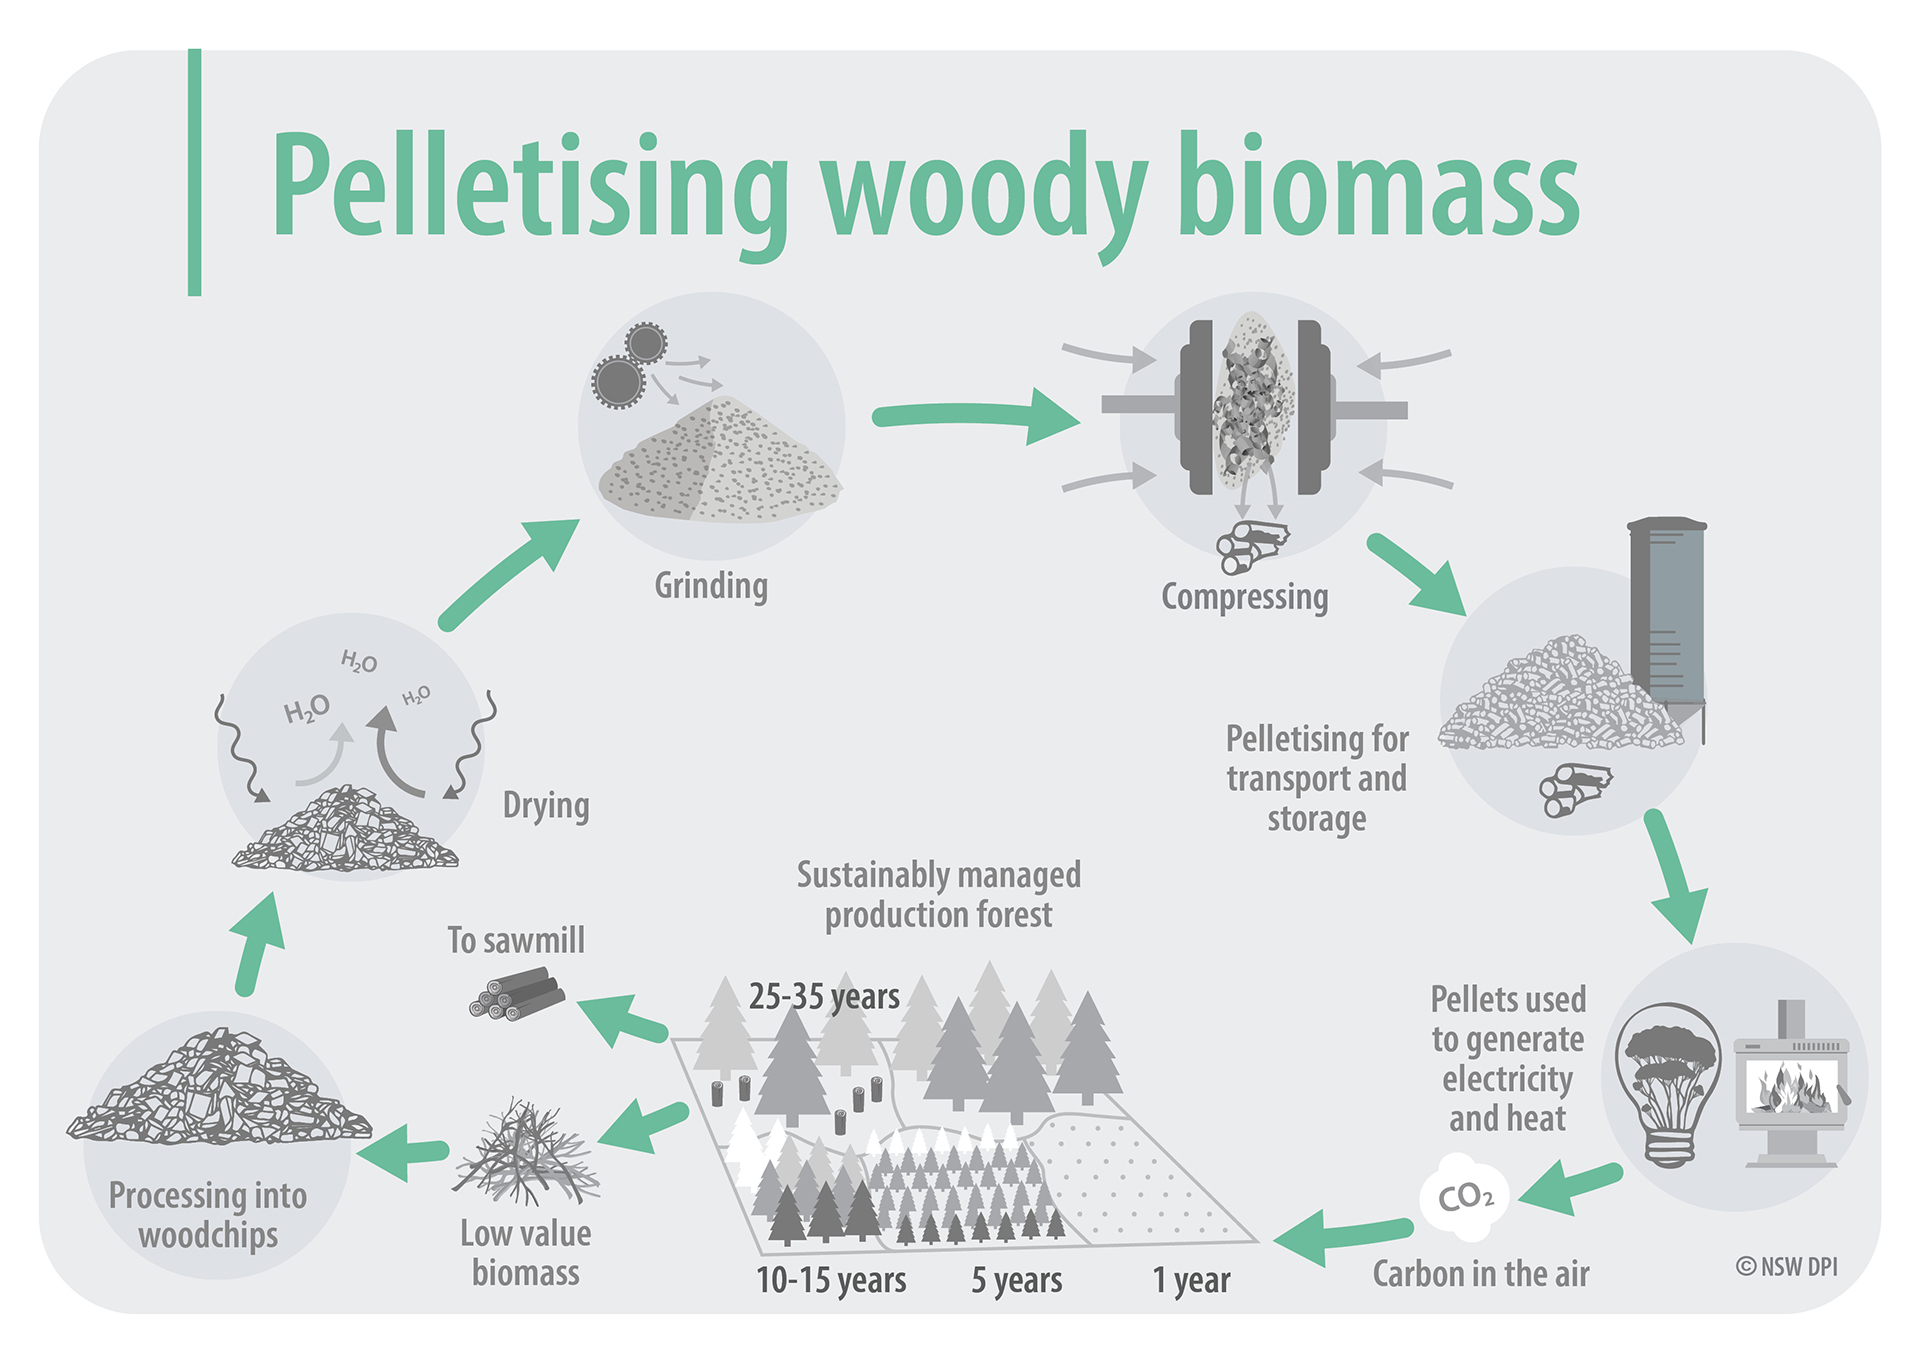 Infographic of pelletising woody biomass. This document is not fully accessible, please contact fabiano.ximenes@dpi.nsw.gov.au for more information.